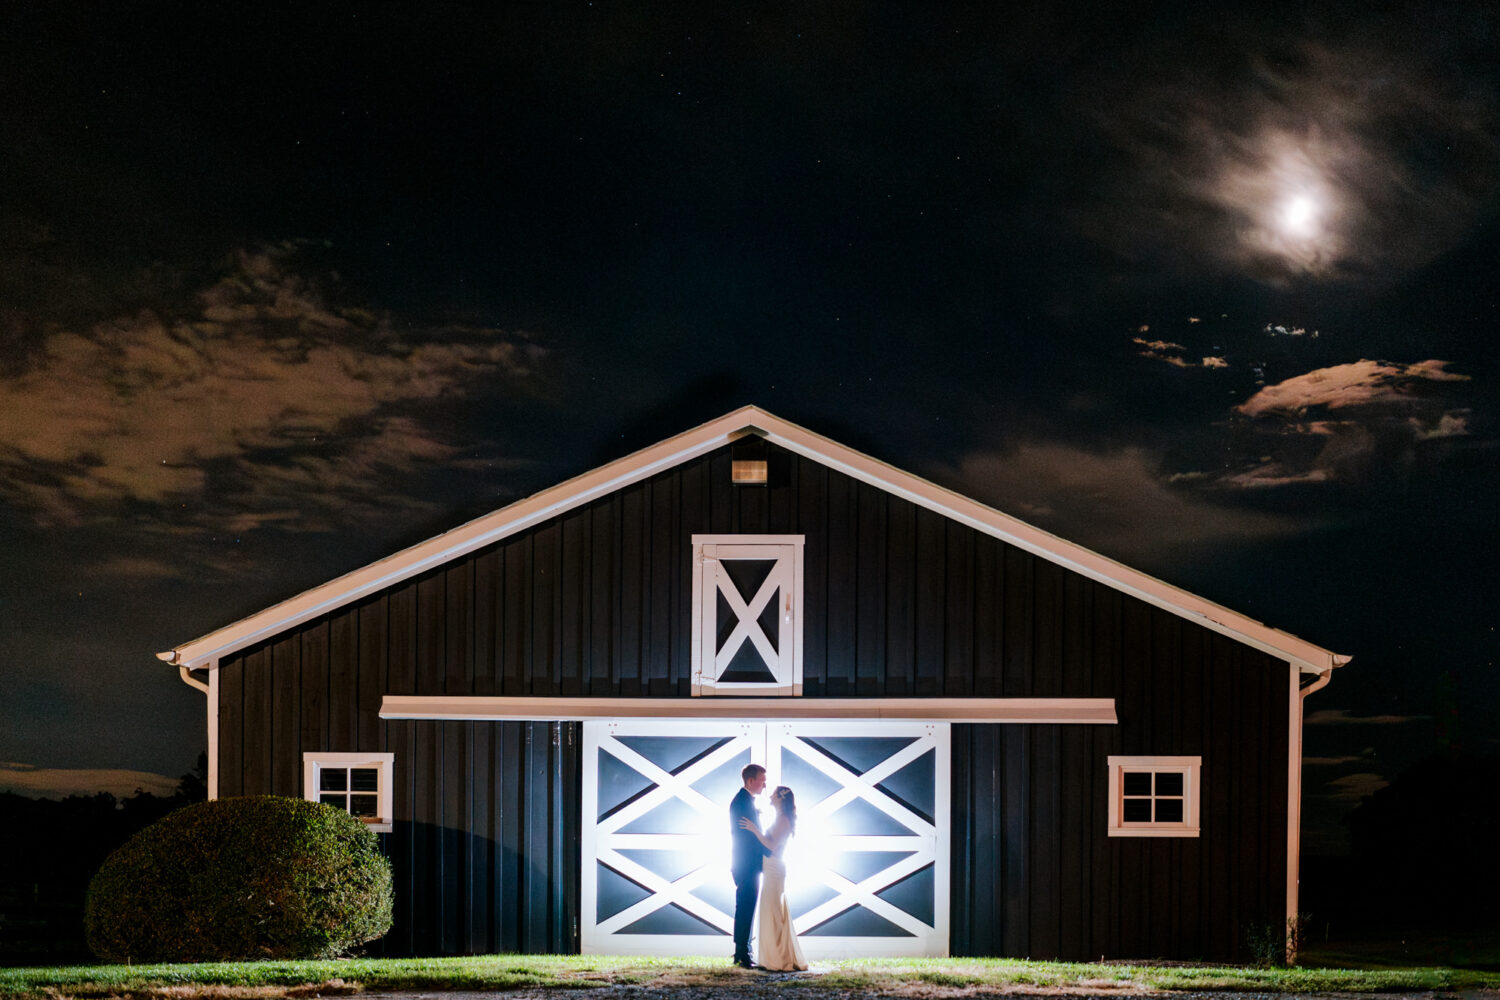 bride and groom taking a creative silhouette portrait together in the night sky